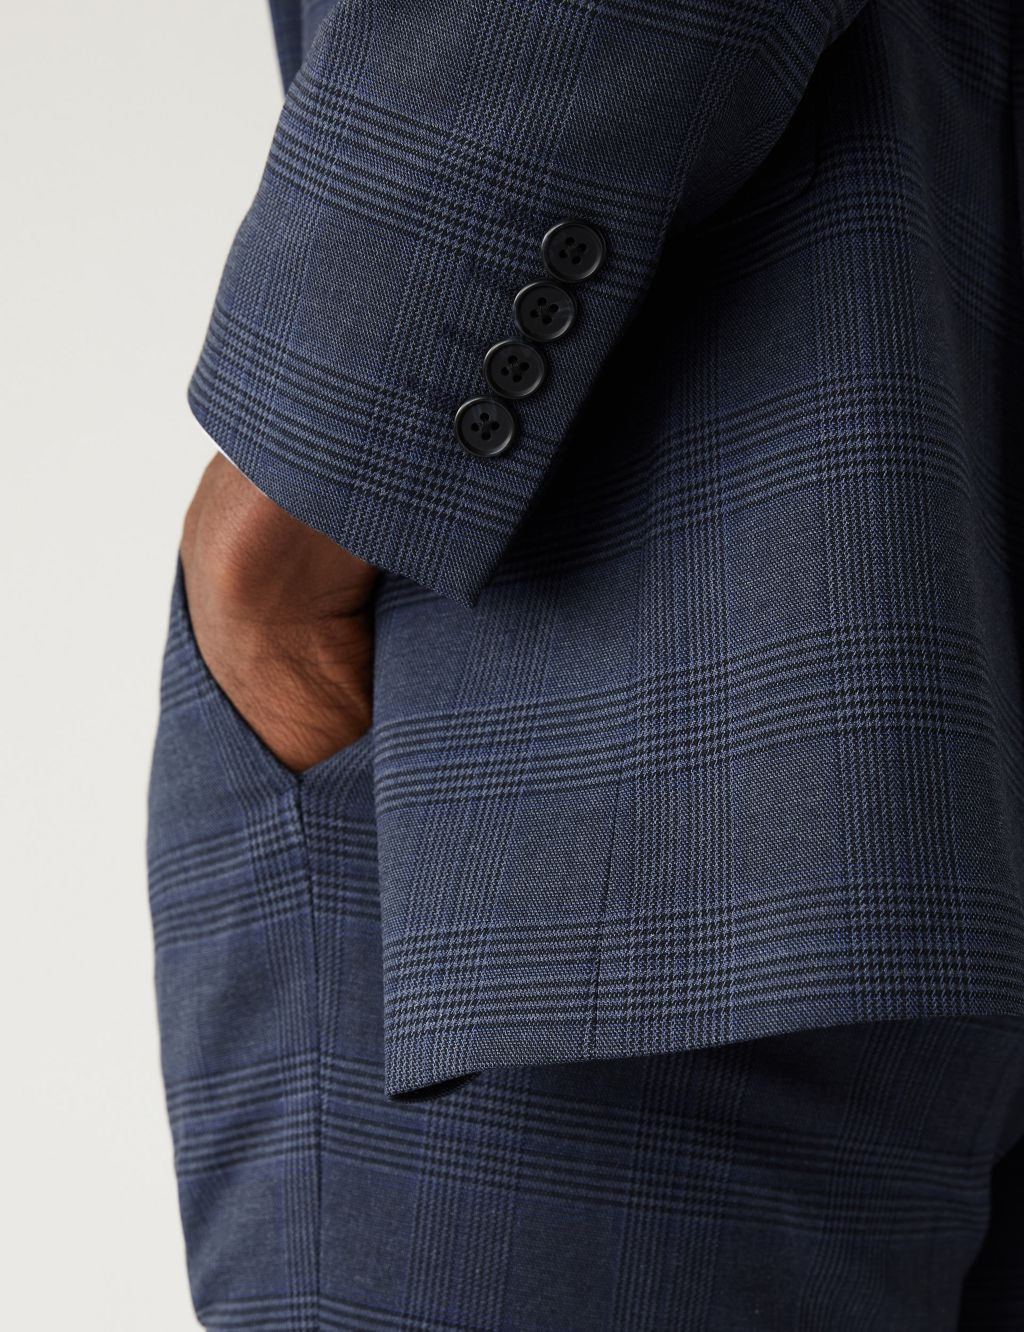 Regular Fit Prince of Wales Check Suit Jacket image 4